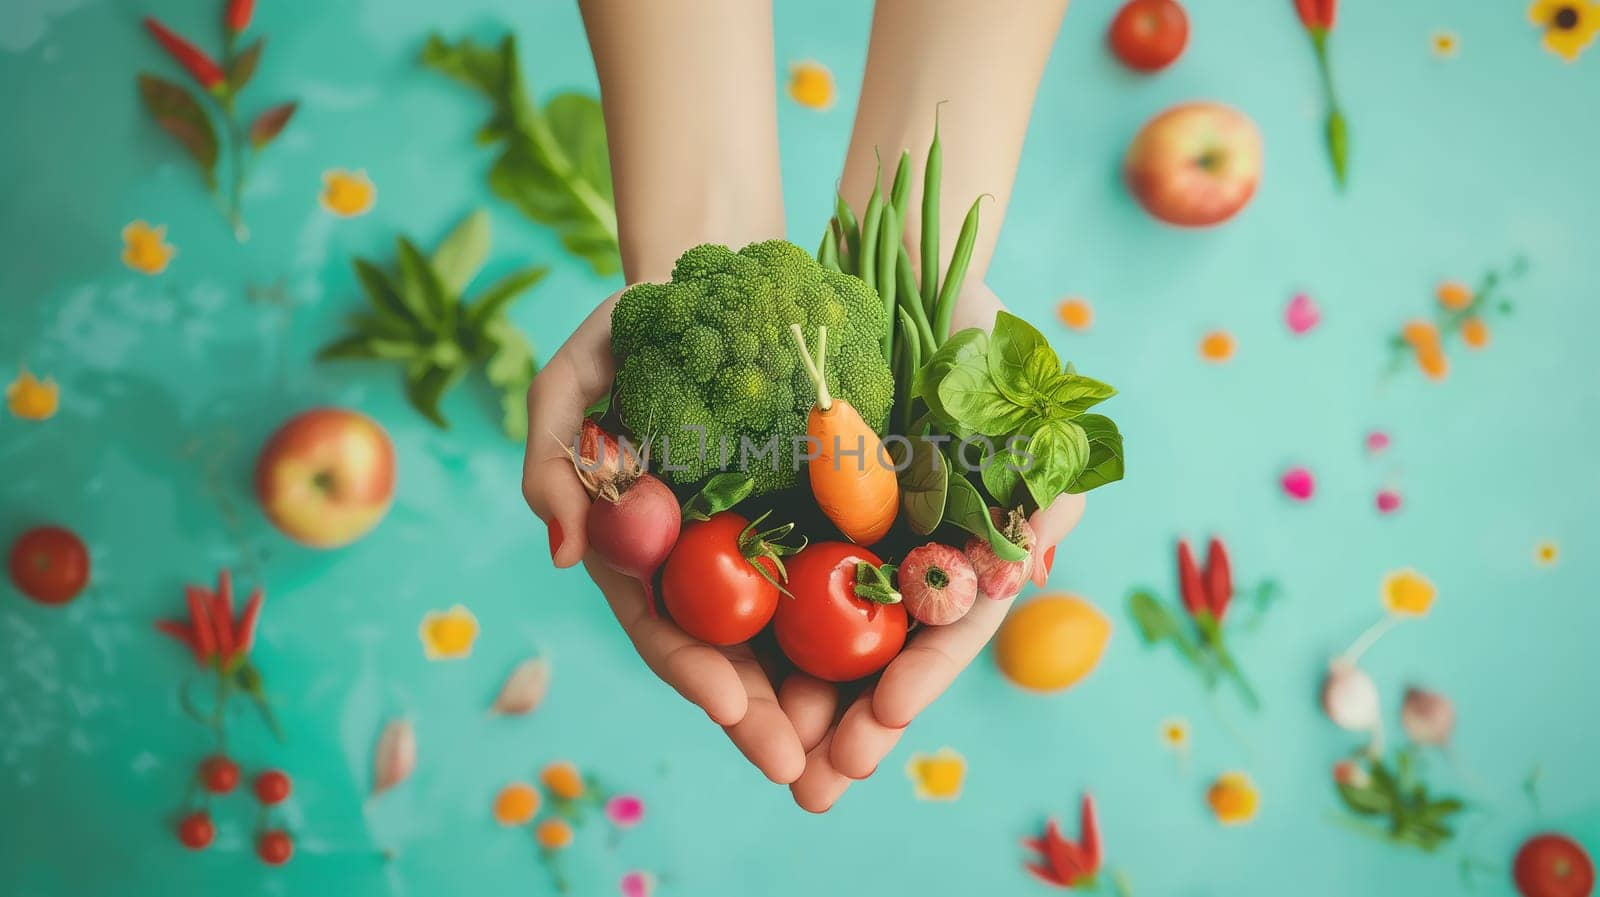 A person is holding a variety of fresh vegetables in their hands, showcasing a bountiful harvest from a garden or market. The colorful assortment includes tomatoes, carrots, peppers, and more.